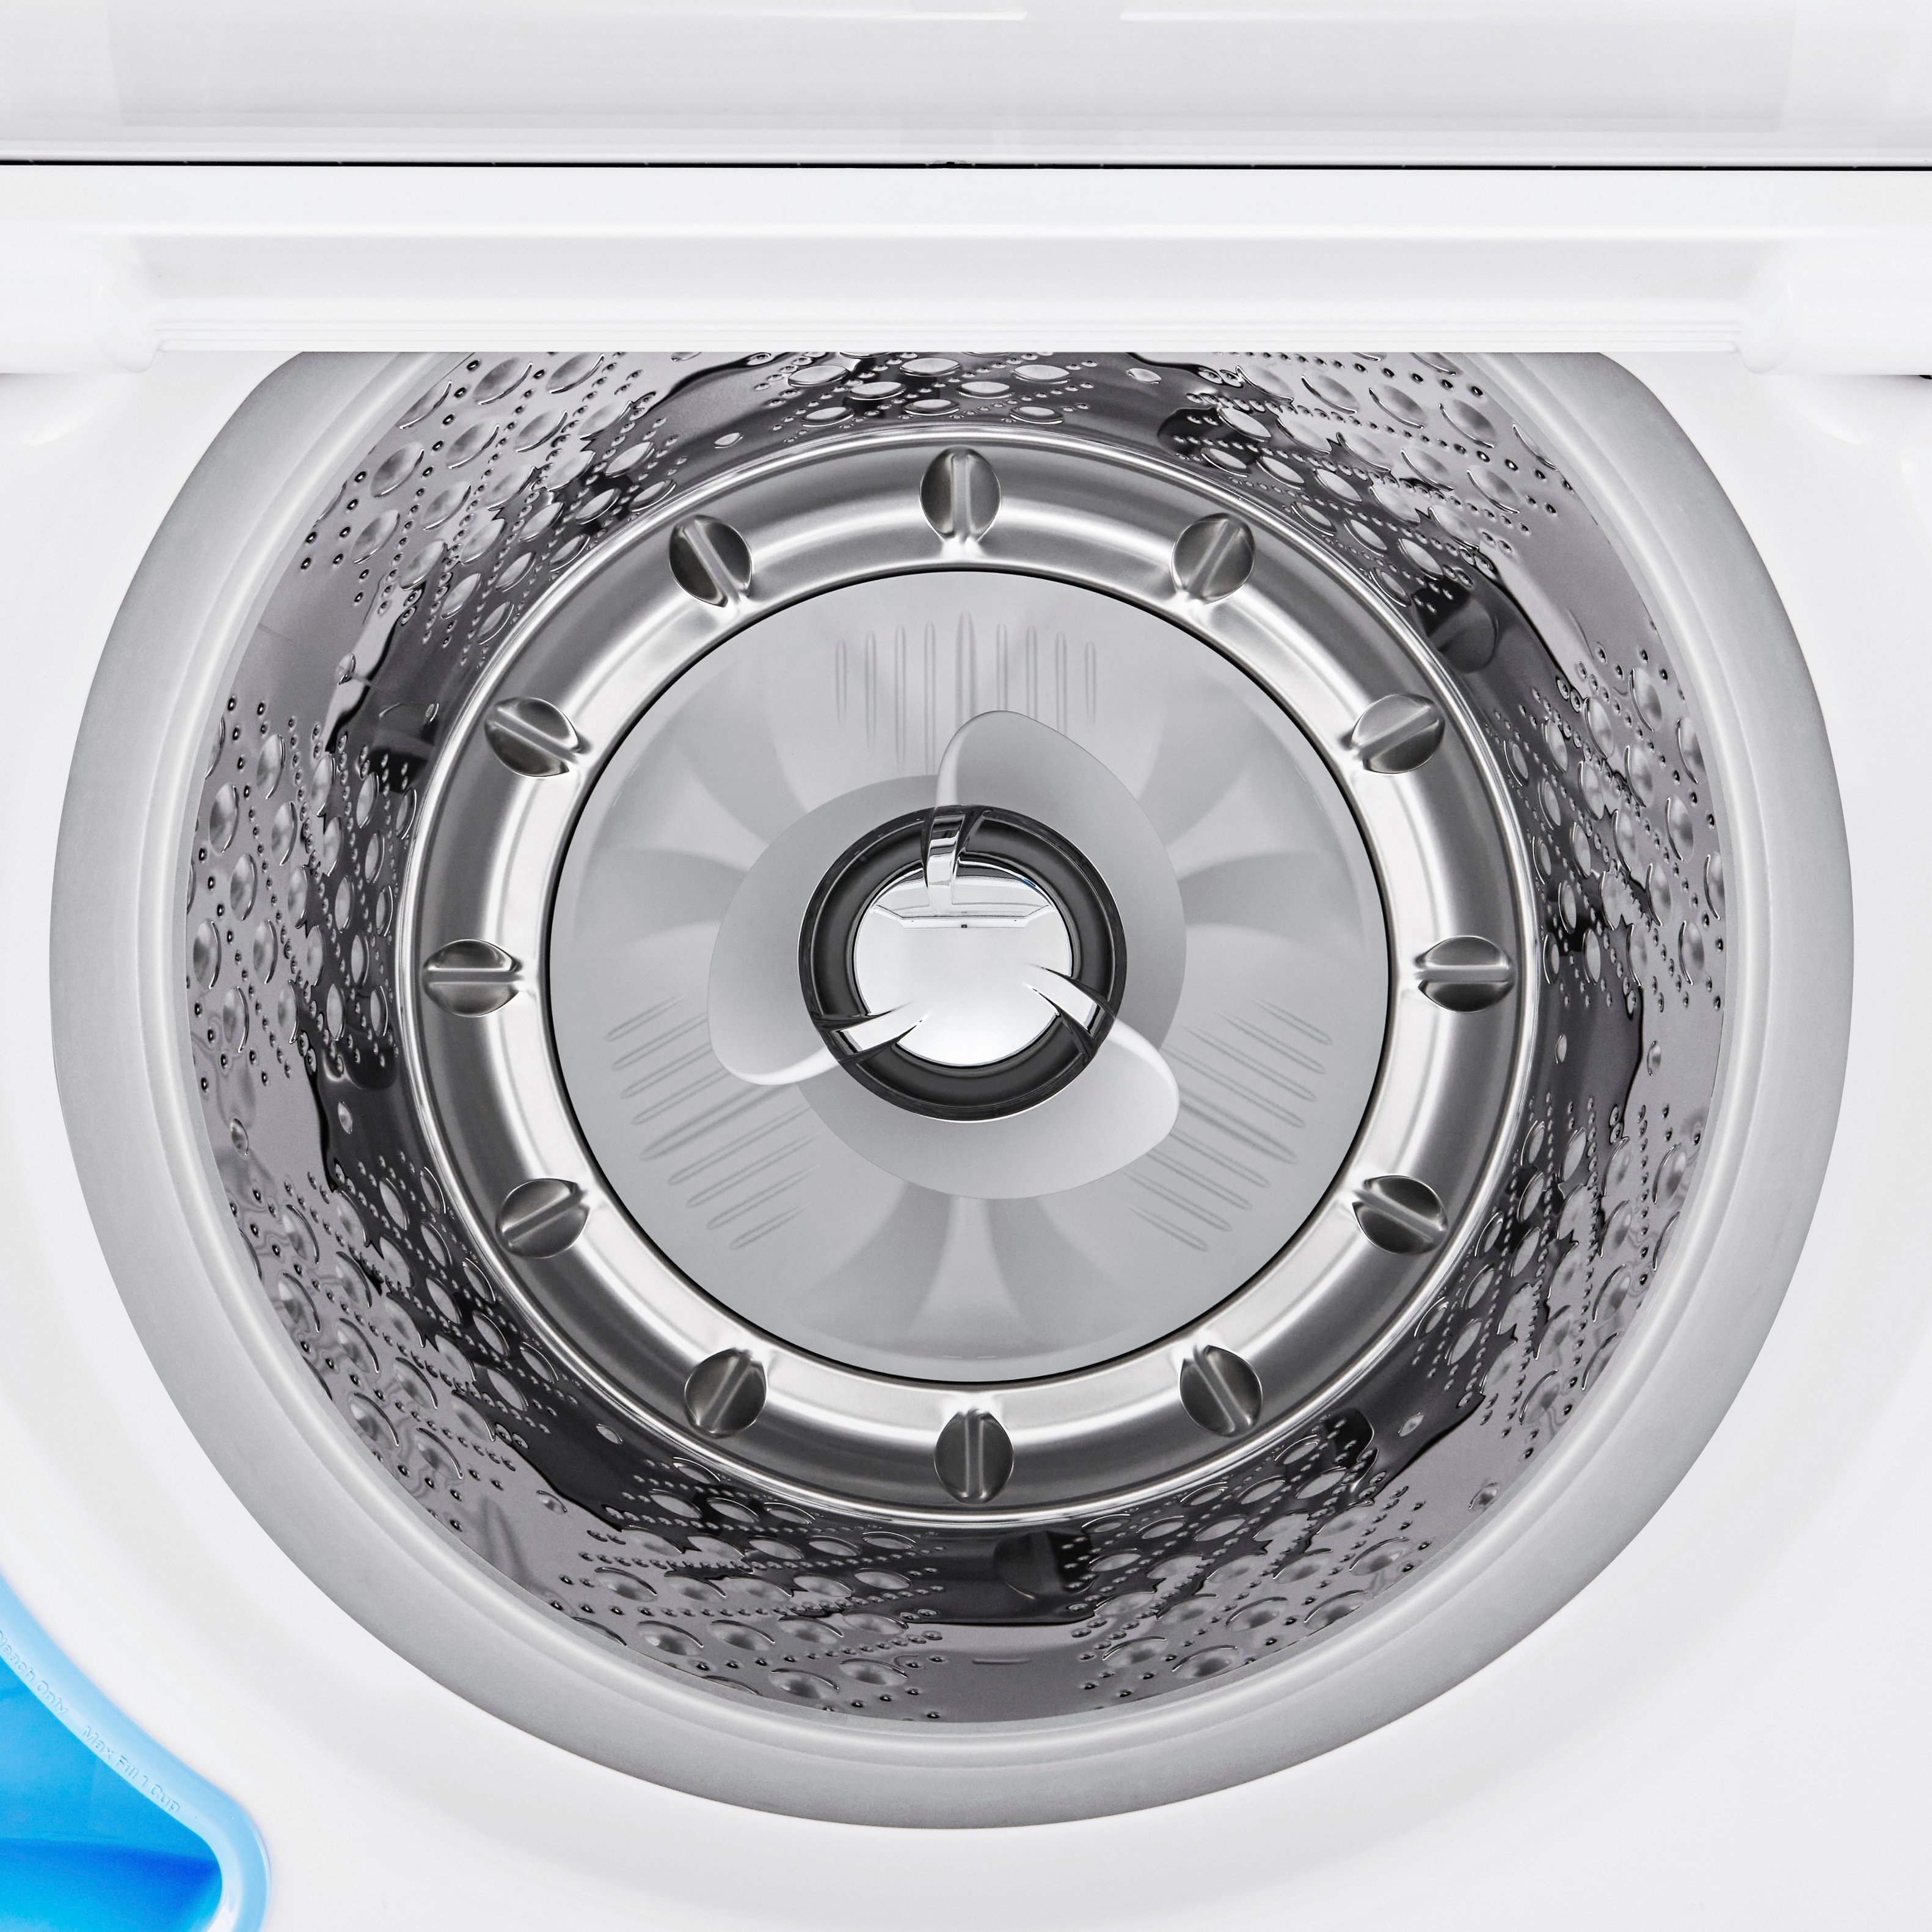 LG 5.3 cu. ft High-Efficiency Smart Top Load Washer with 4-Way